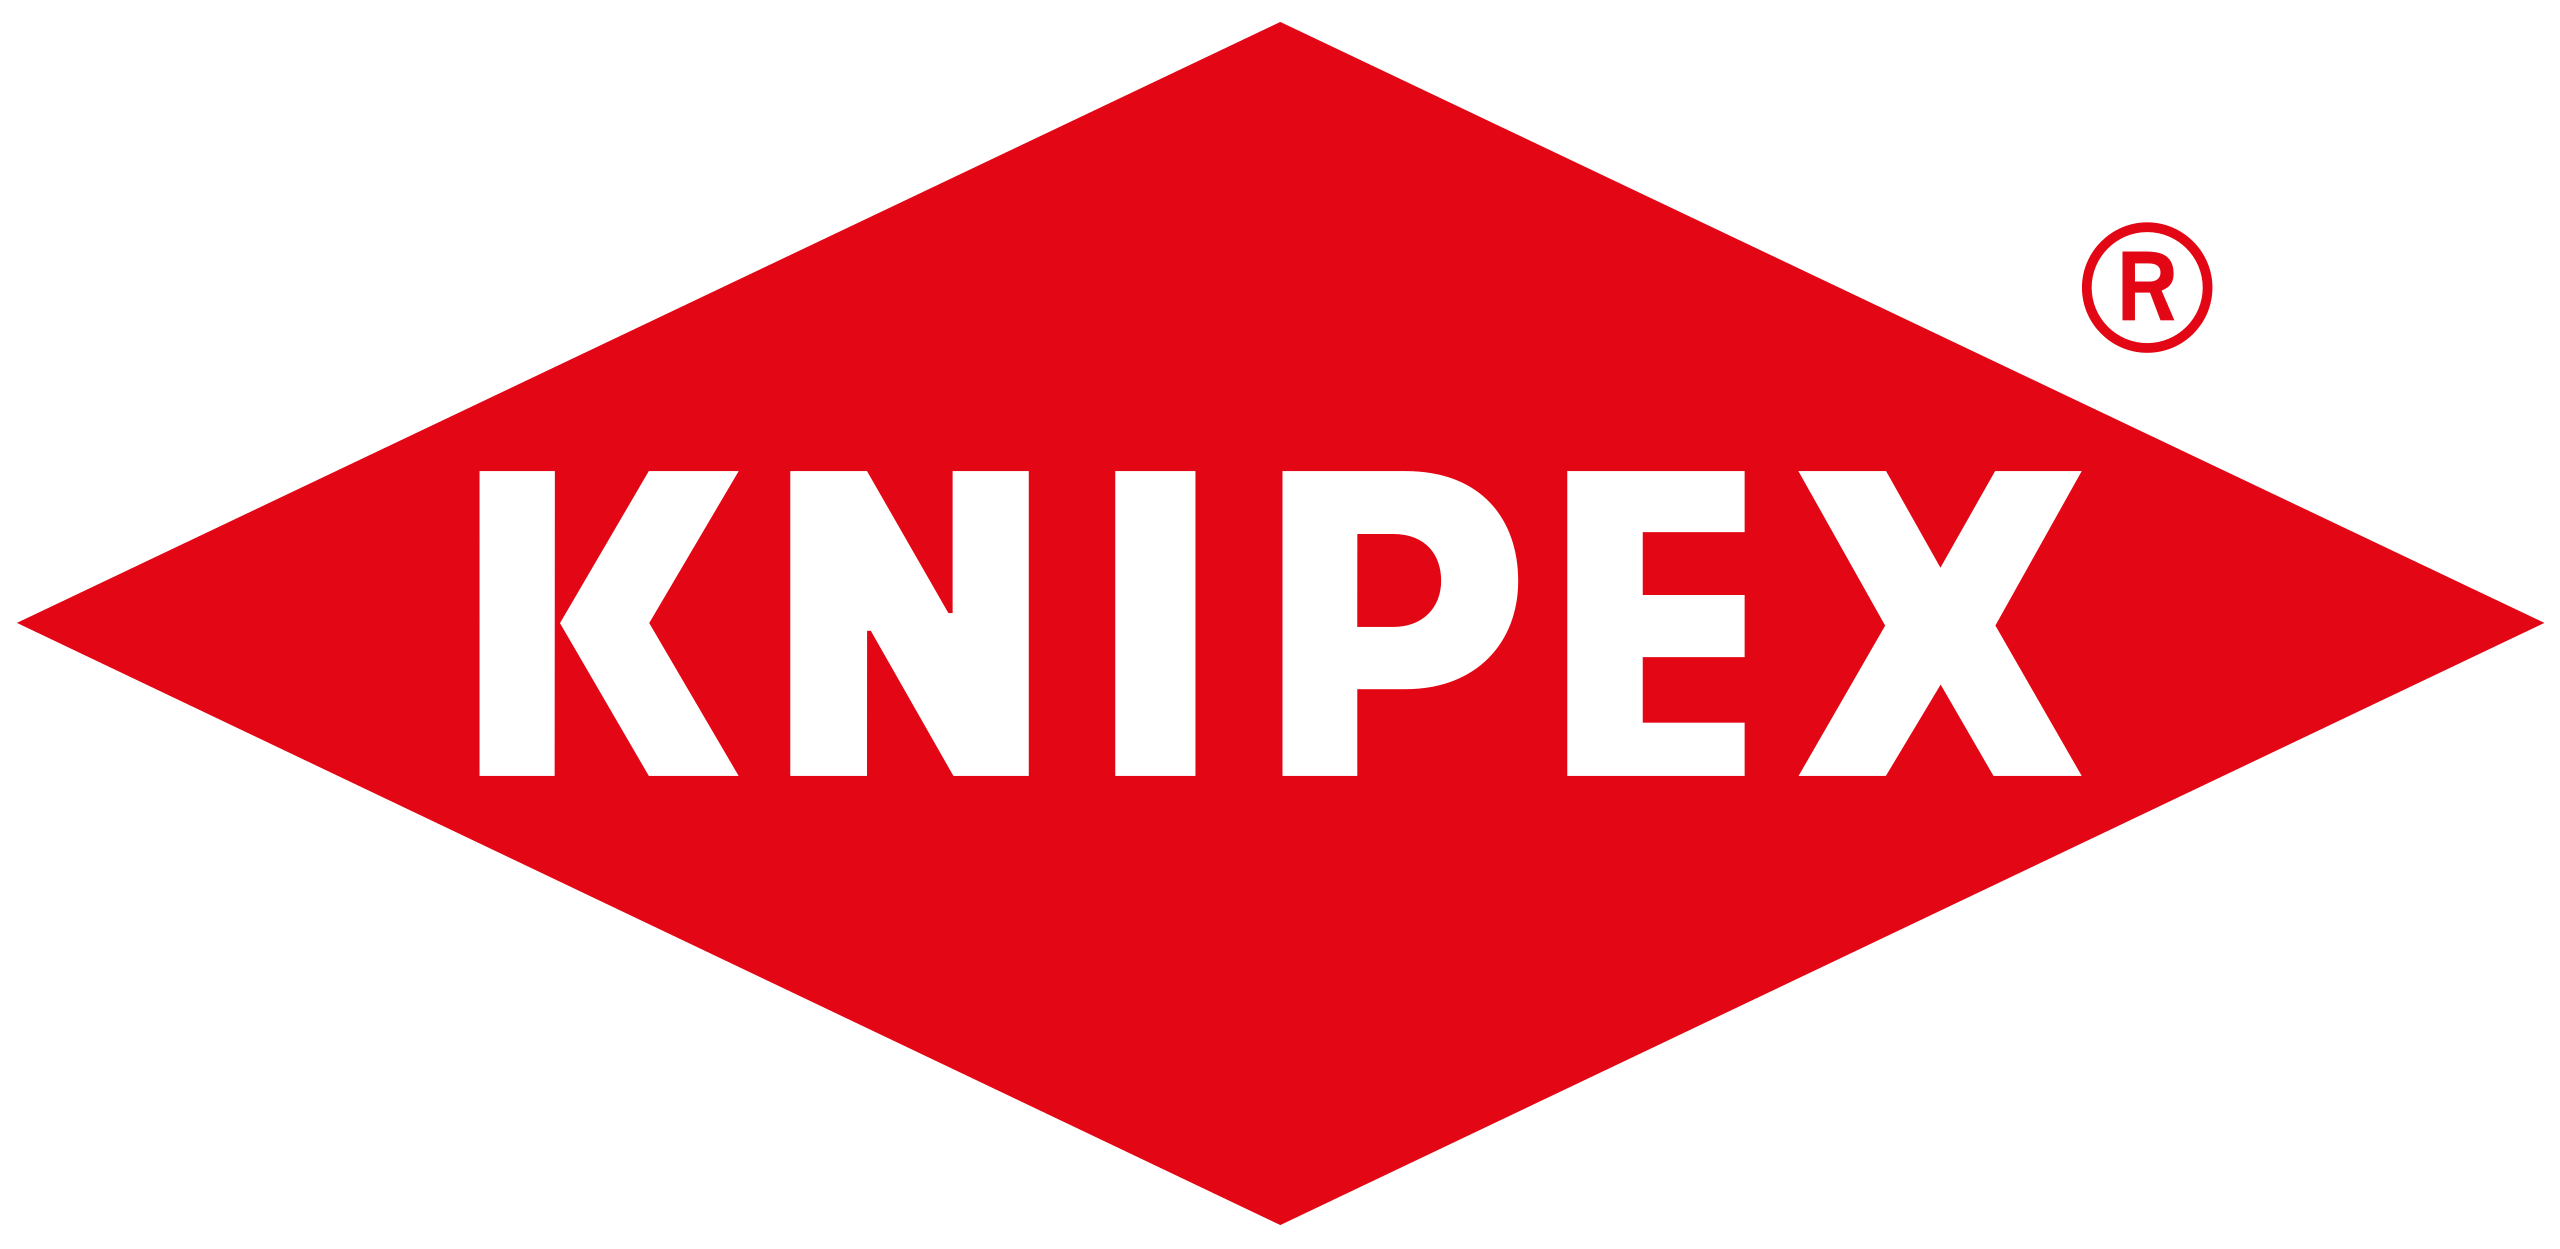 Knipex boutensnijtang compact 200mm badge